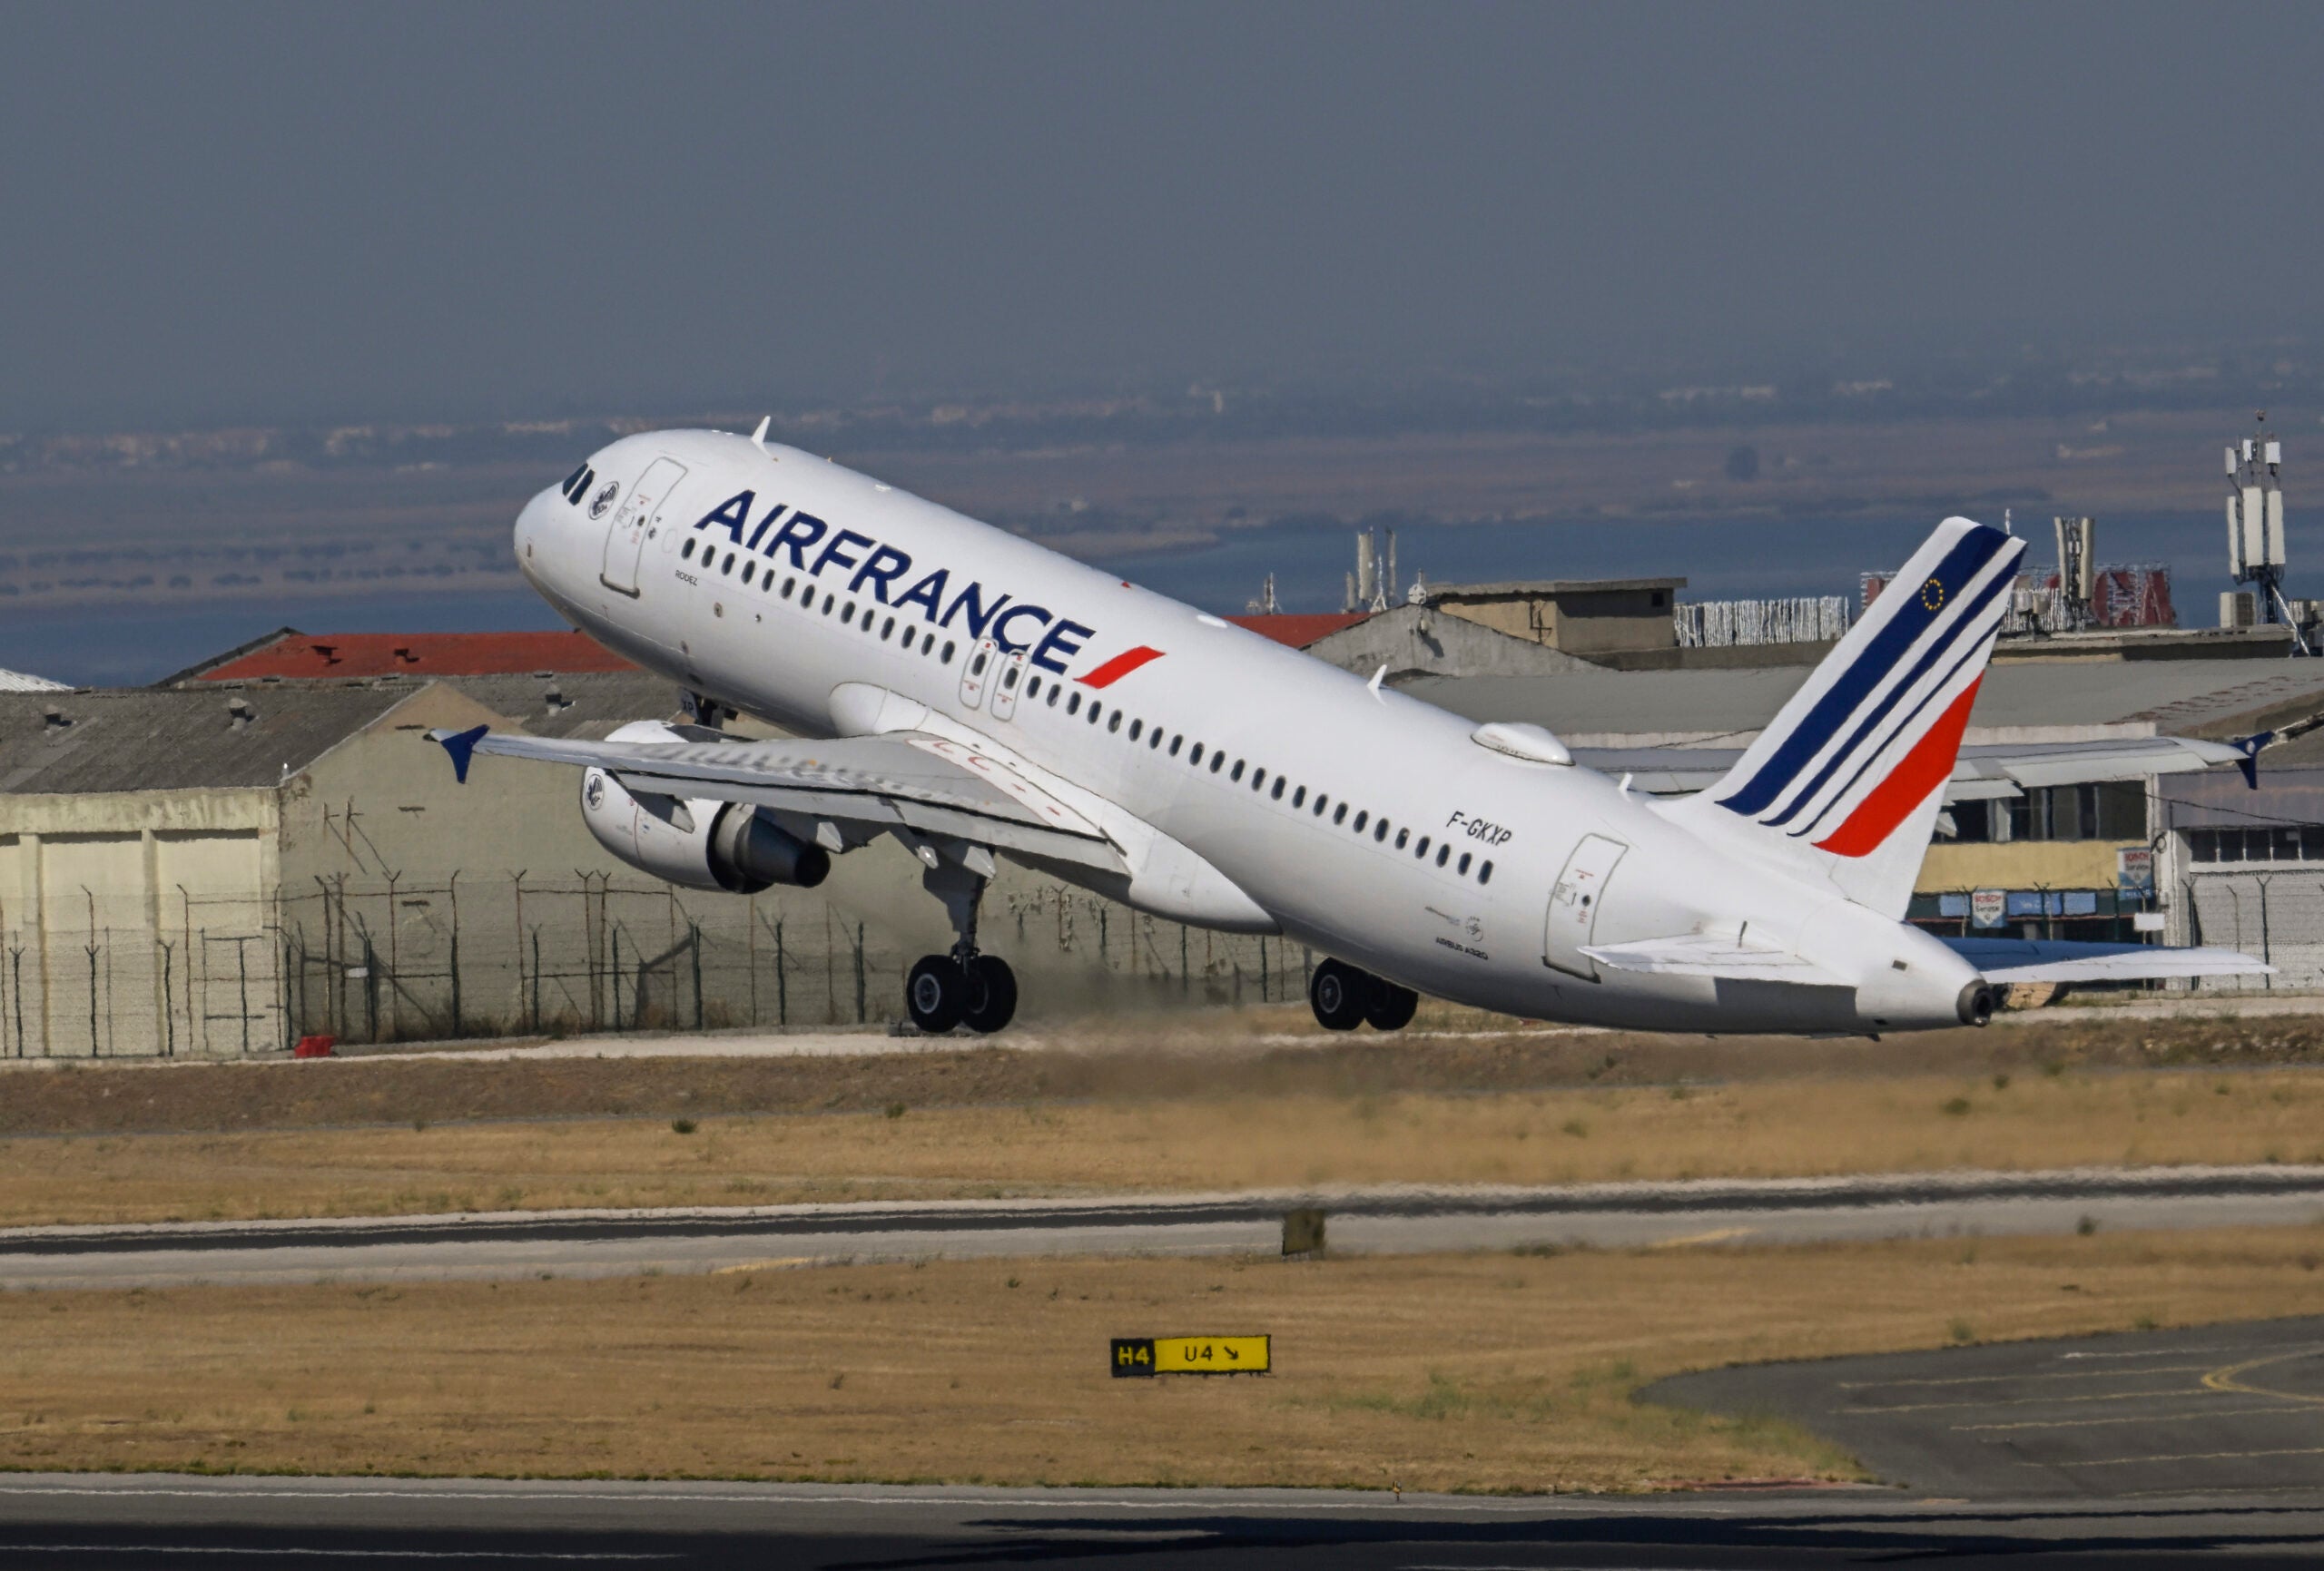 An Air France plane is taking off from Lisbon Airport